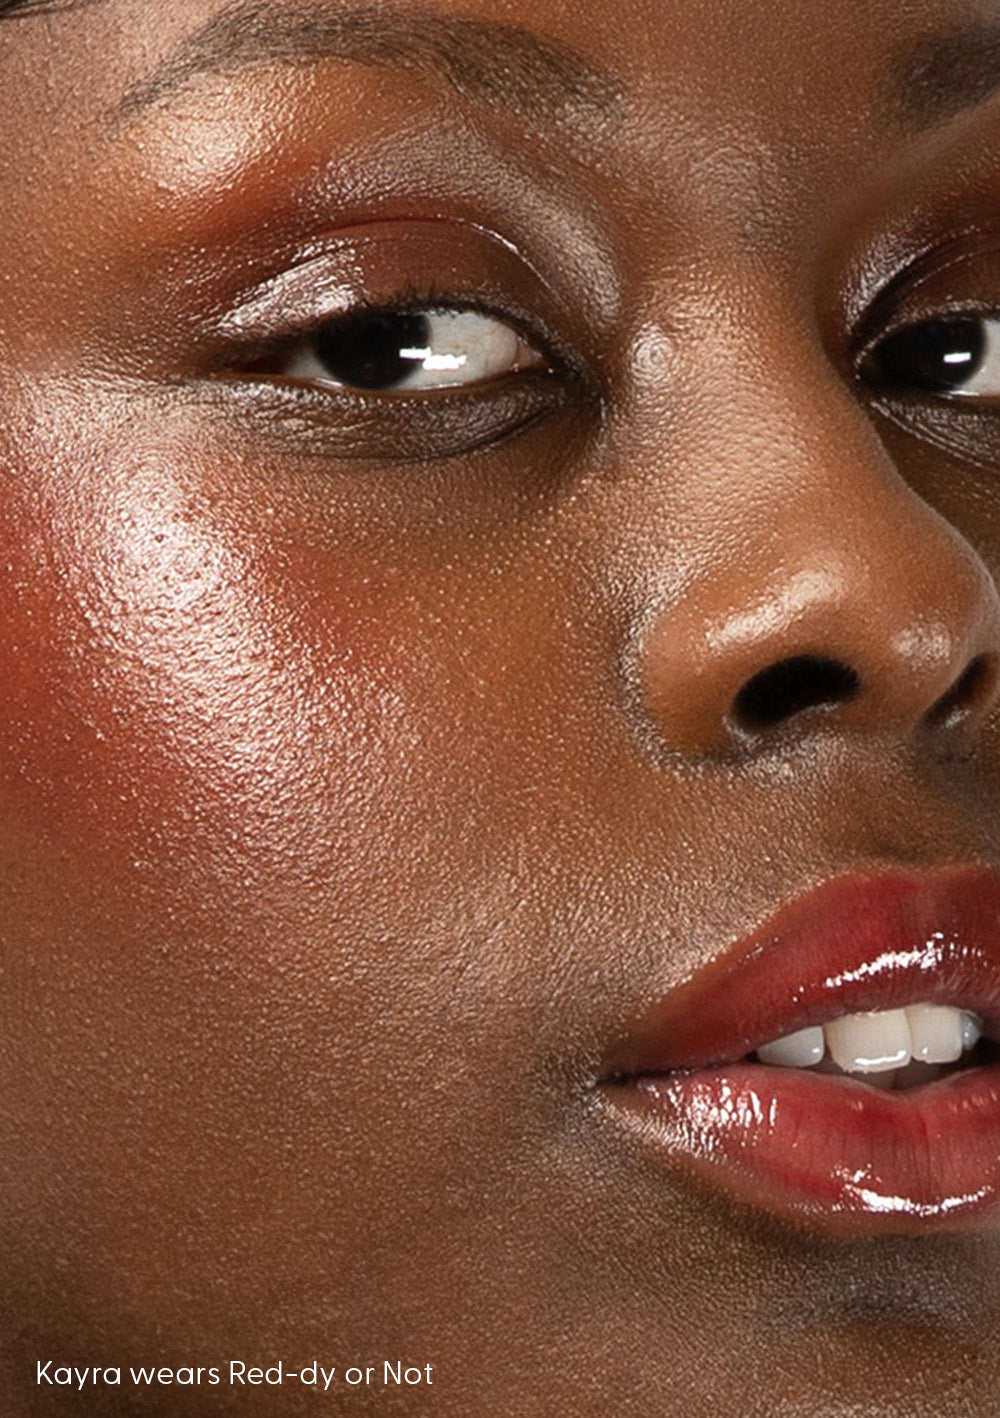 Kayra shines in AvryBeauty’s Red-dy or Not Lip & Cheek Tinted Balm, a versatile vegan makeup essential applied to her cheeks, lips, and eyelids.